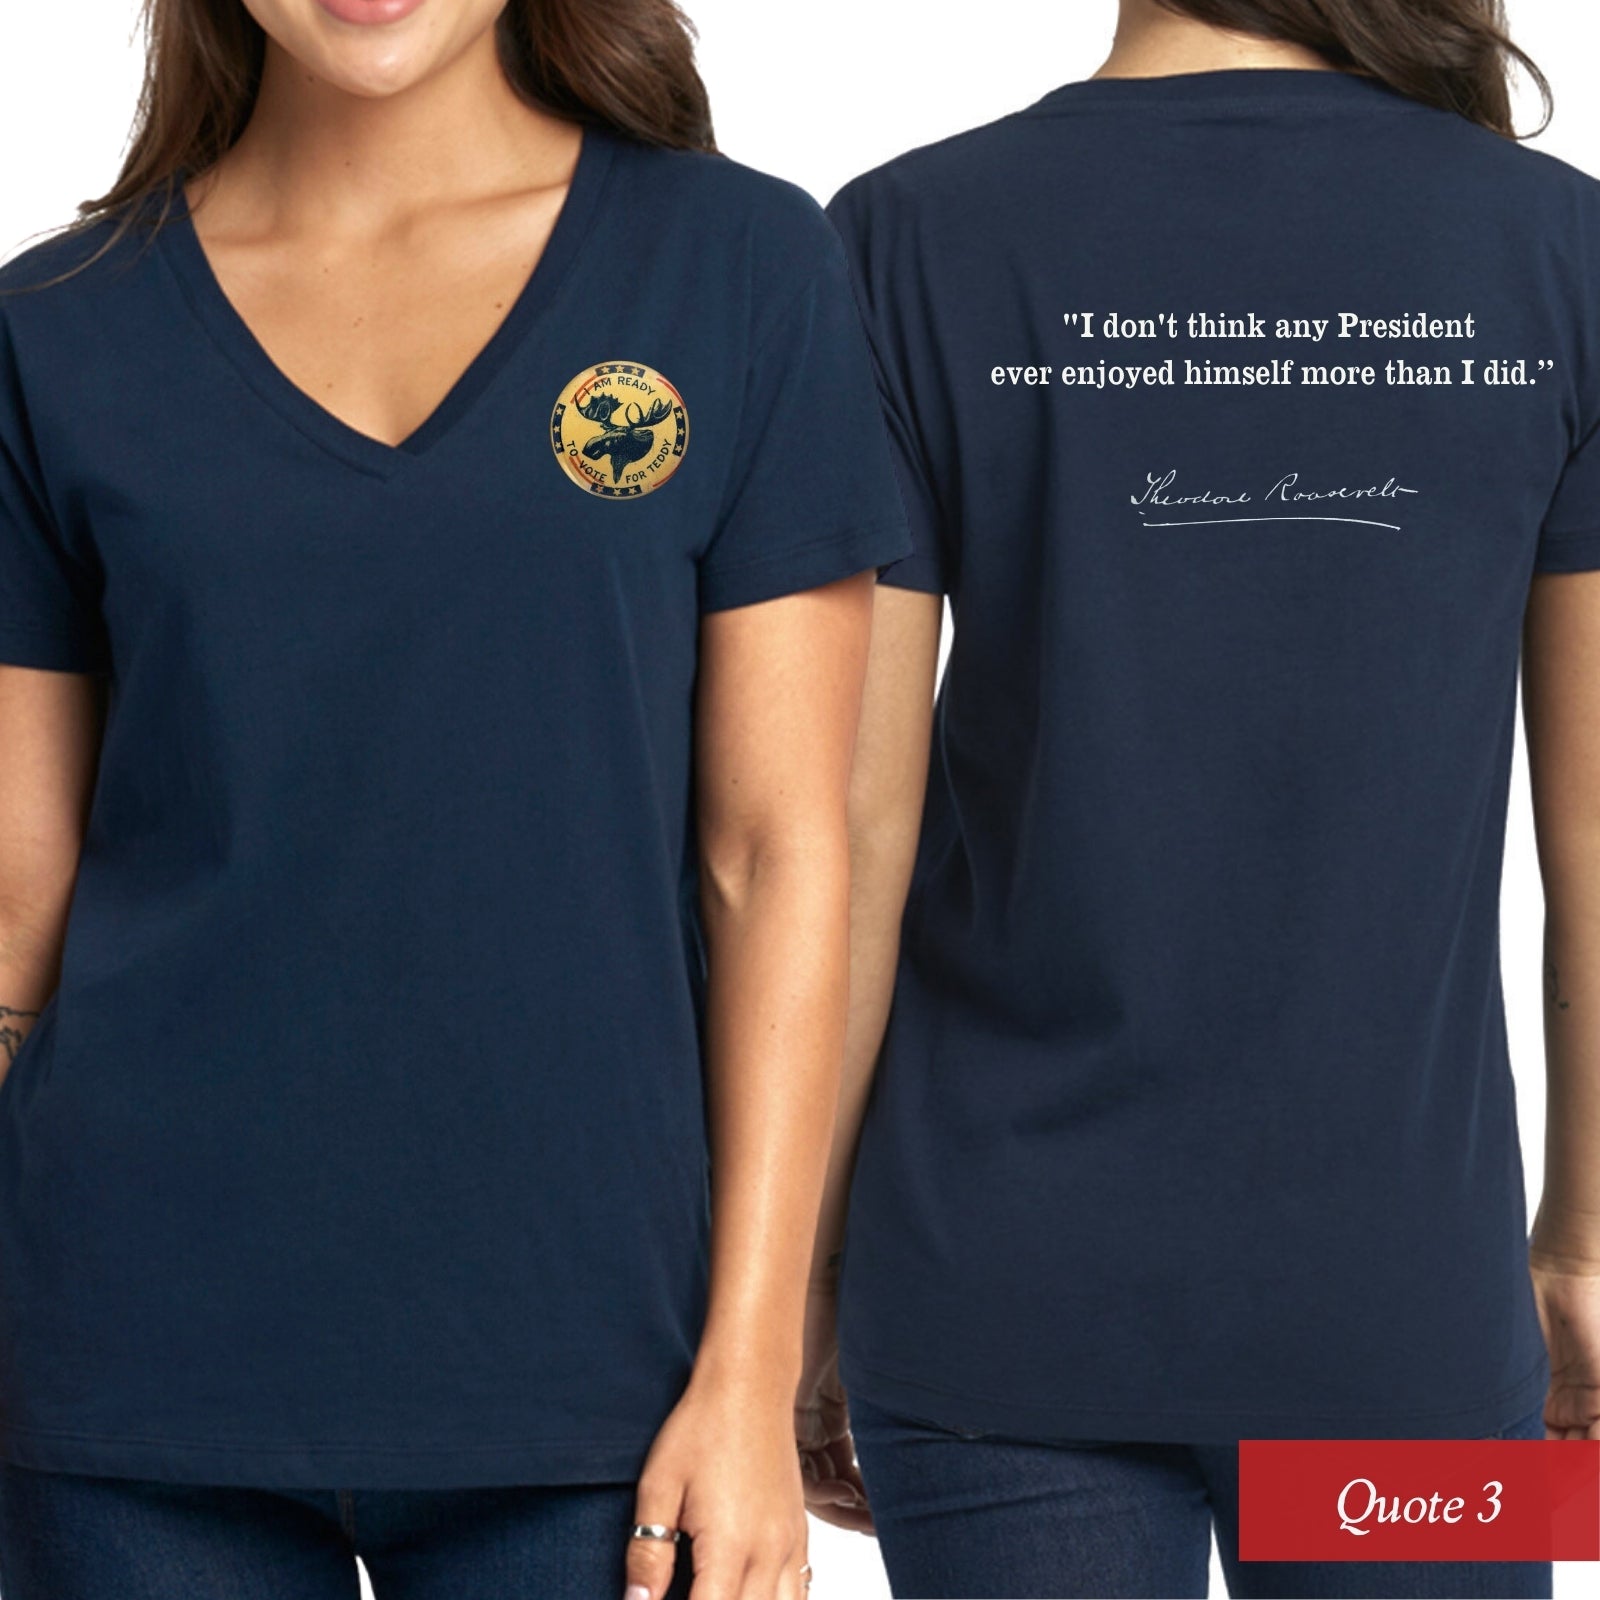 Quote 3 of the Teddy Roosevelt “I’m ready to vote for Teddy” presidential campaign Women's v-neck shirt from The History List store